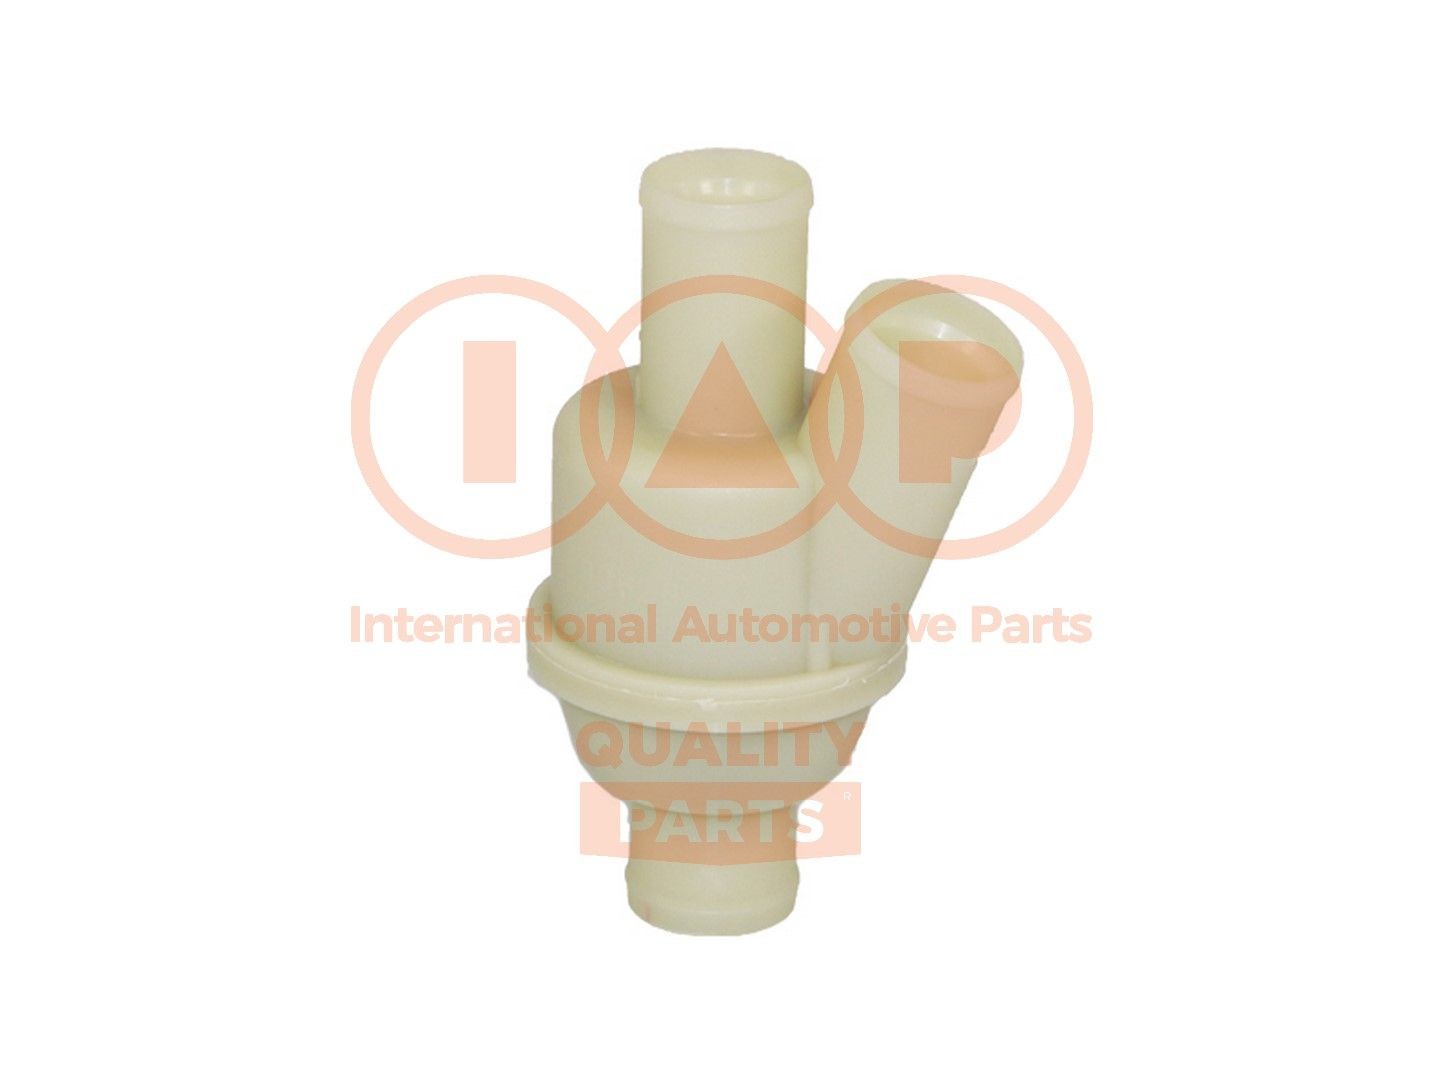 Original 155-14030 IAP QUALITY PARTS Thermostat experience and price